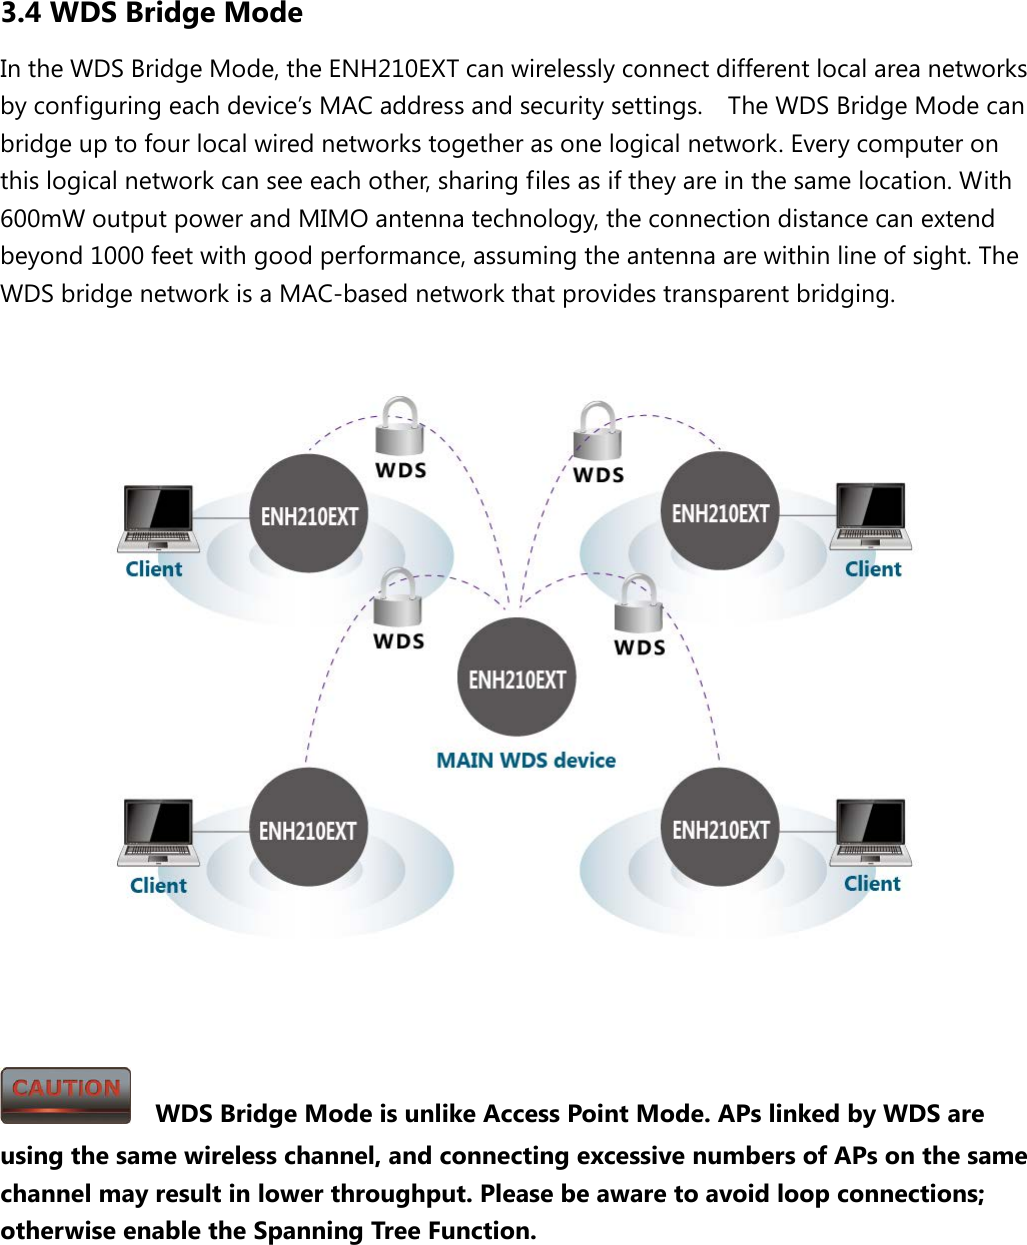   3.4 WDS Bridge Mode In the WDS Bridge Mode, the ENH210EXT can wirelessly connect different local area networks by configuring each device’s MAC address and security settings.  The WDS Bridge Mode can bridge up to four local wired networks together as one logical network. Every computer on this logical network can see each other, sharing files as if they are in the same location. With 600mW output power and MIMO antenna technology, the connection distance can extend beyond 1000 feet with good performance, assuming the antenna are within line of sight. The WDS bridge network is a MAC-based network that provides transparent bridging.       WDS Bridge Mode is unlike Access Point Mode. APs linked by WDS are using the same wireless channel, and connecting excessive numbers of APs on the same channel may result in lower throughput. Please be aware to avoid loop connections; otherwise enable the Spanning Tree Function.   